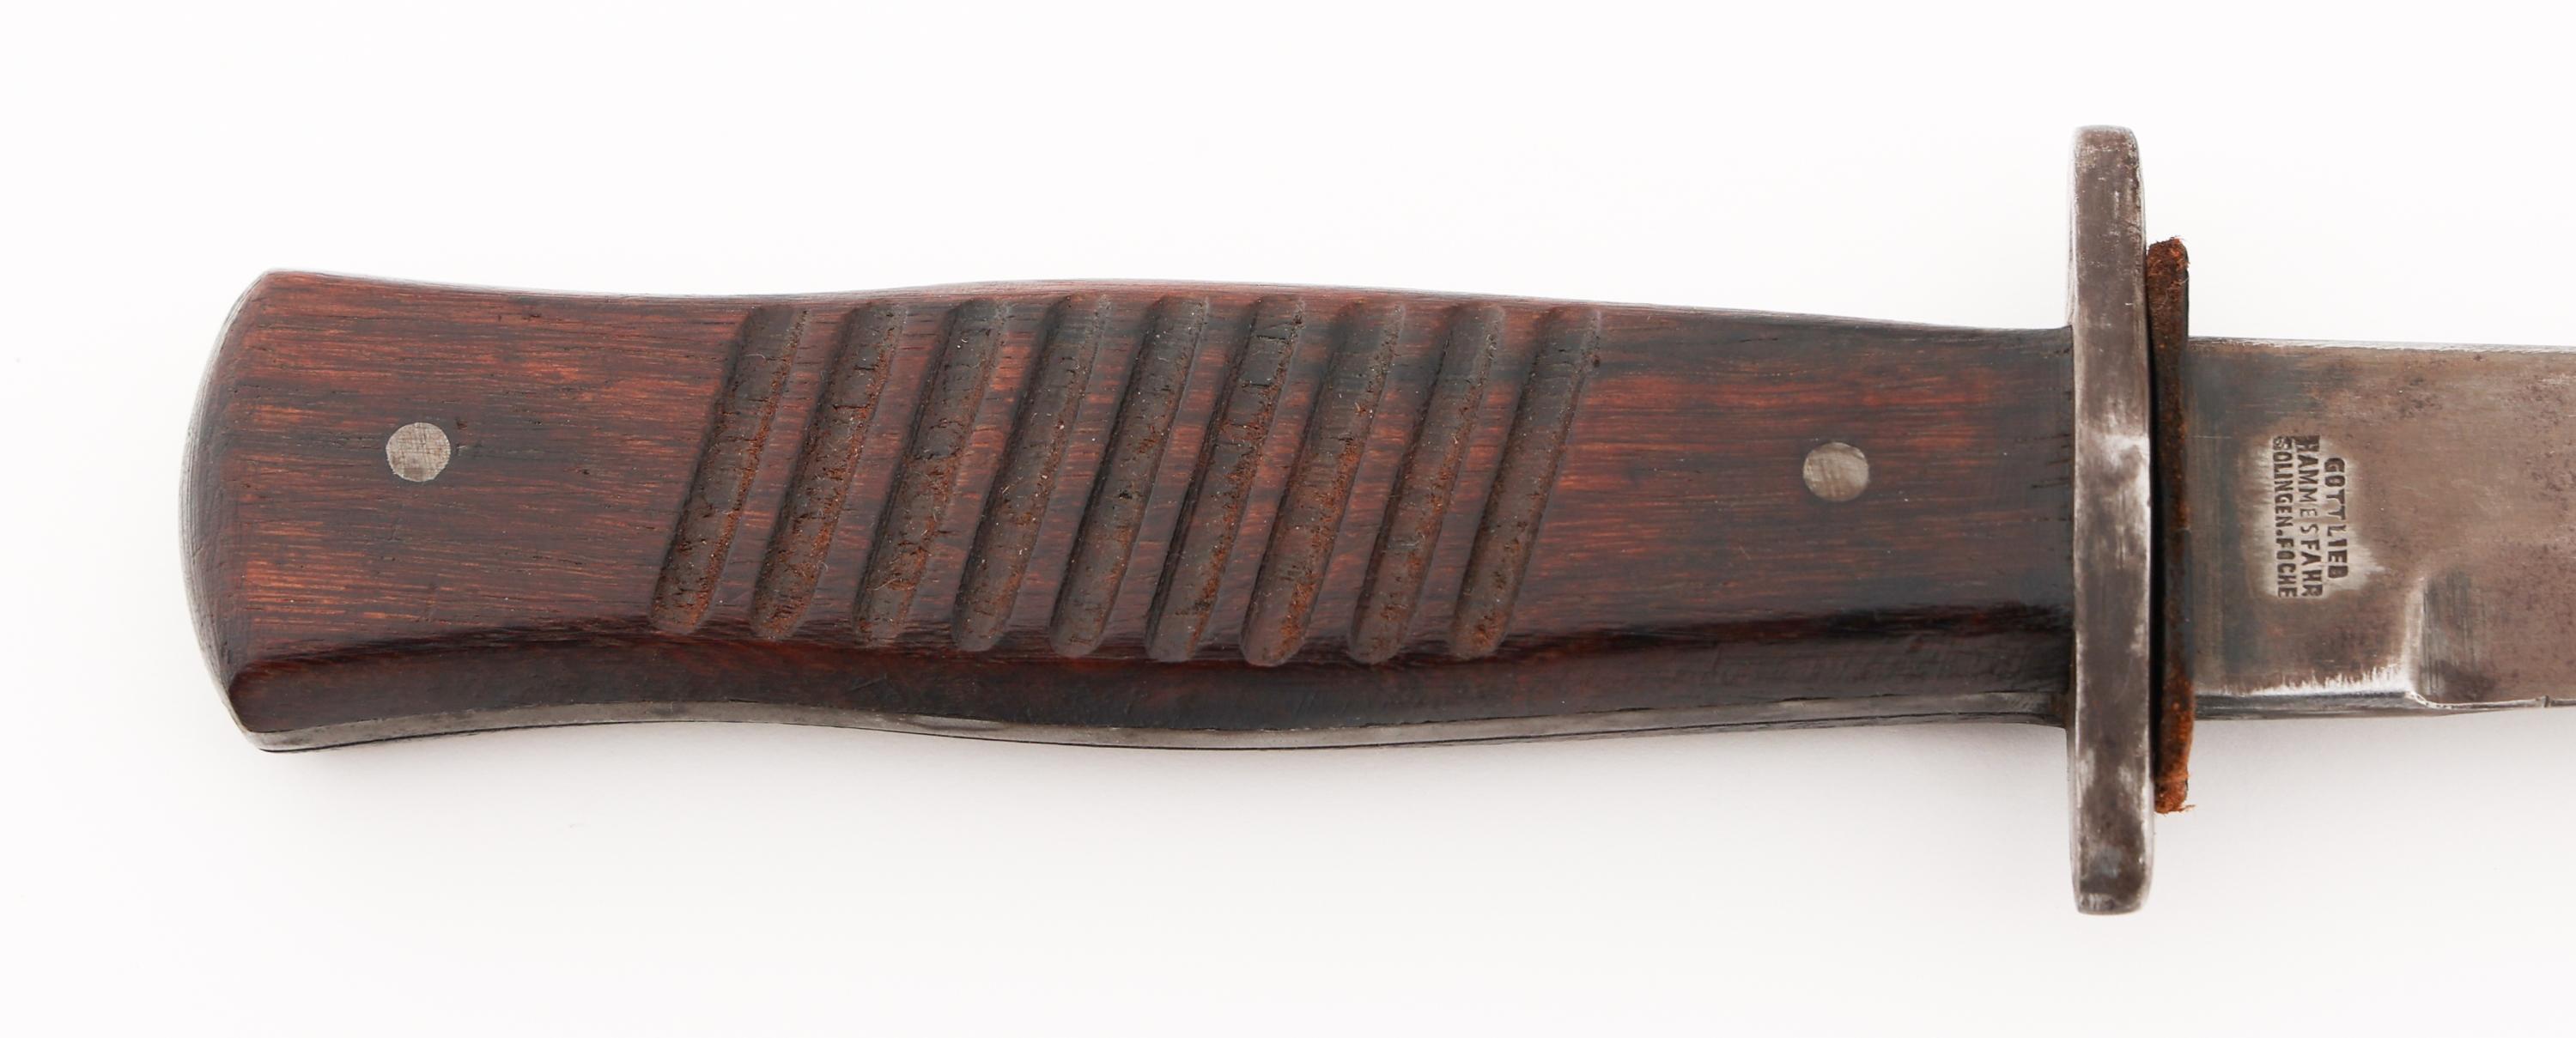 WWI IMPERIAL GERMAN BOOT KNIFE by HAMMESFAHR